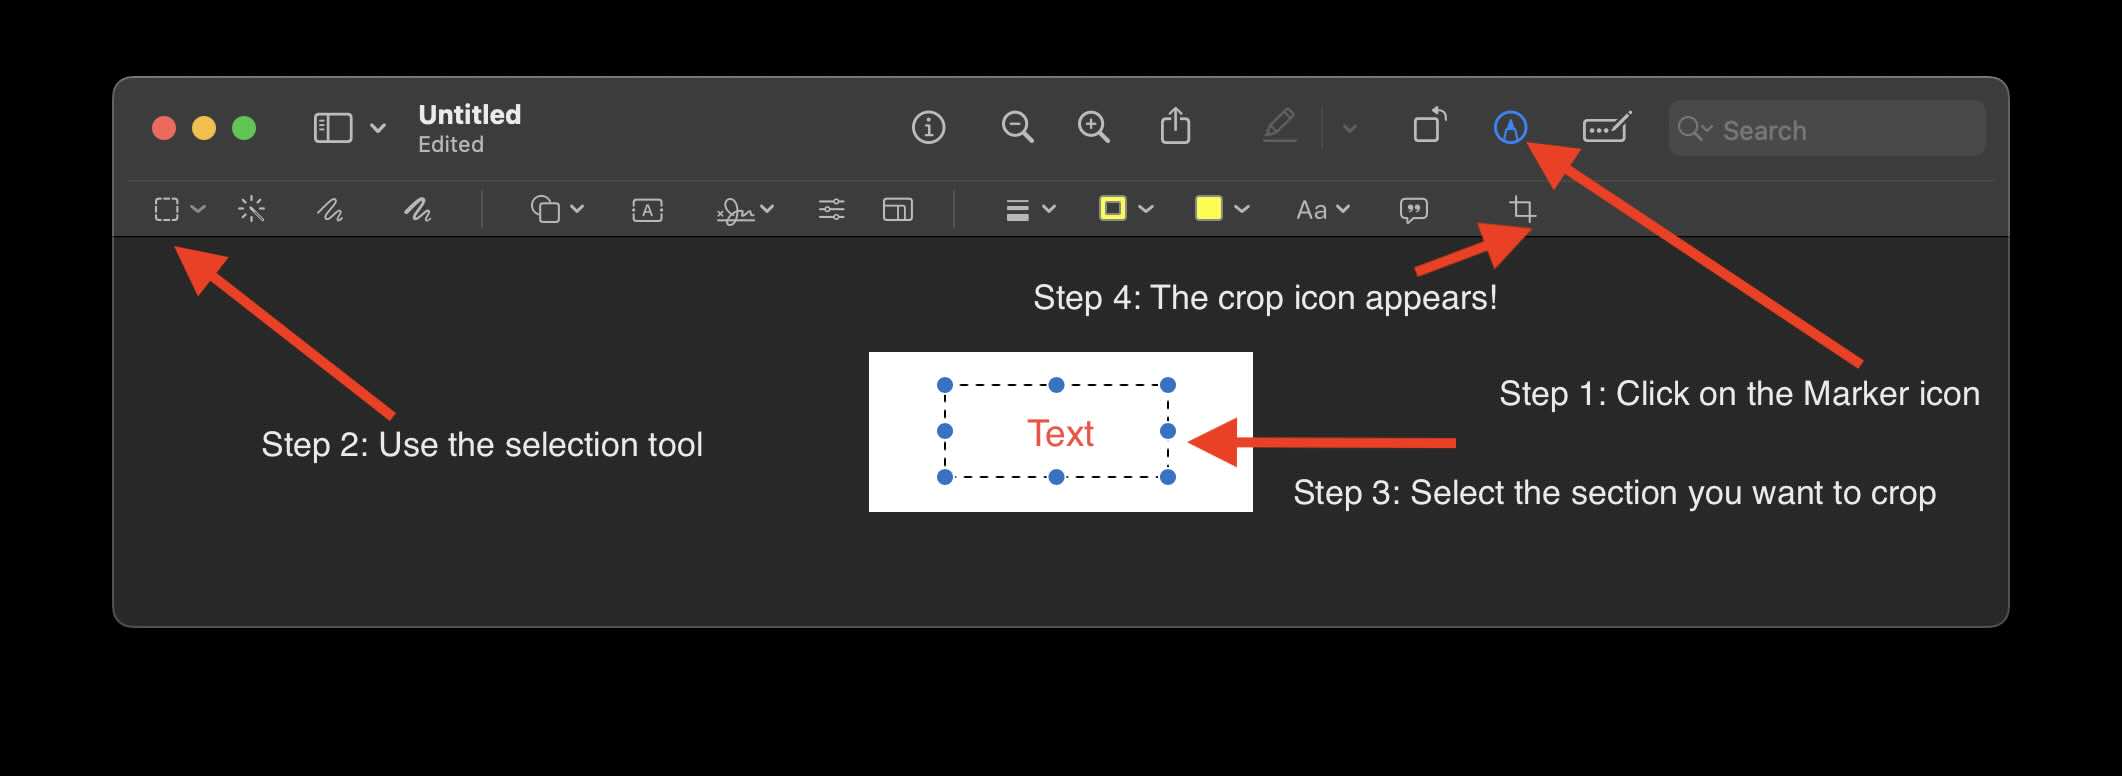 How to enable the crop icon option in Preview App on Mac